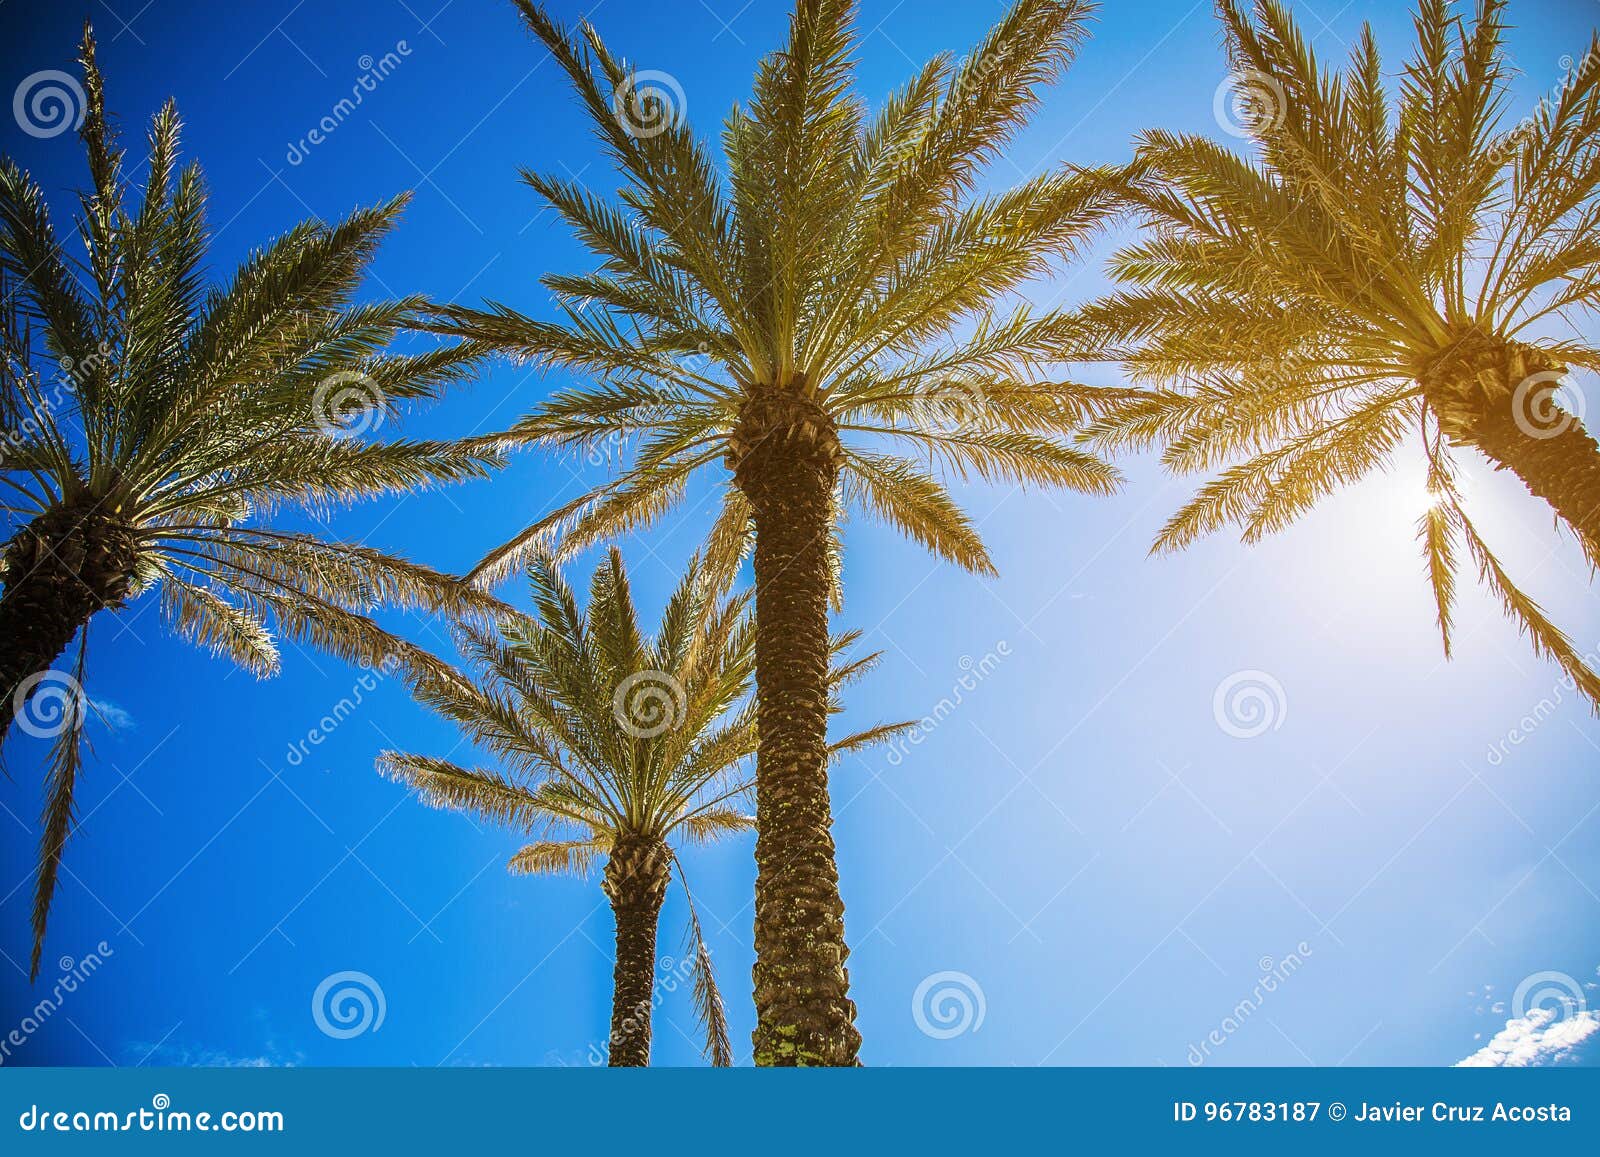 palm tree in florida